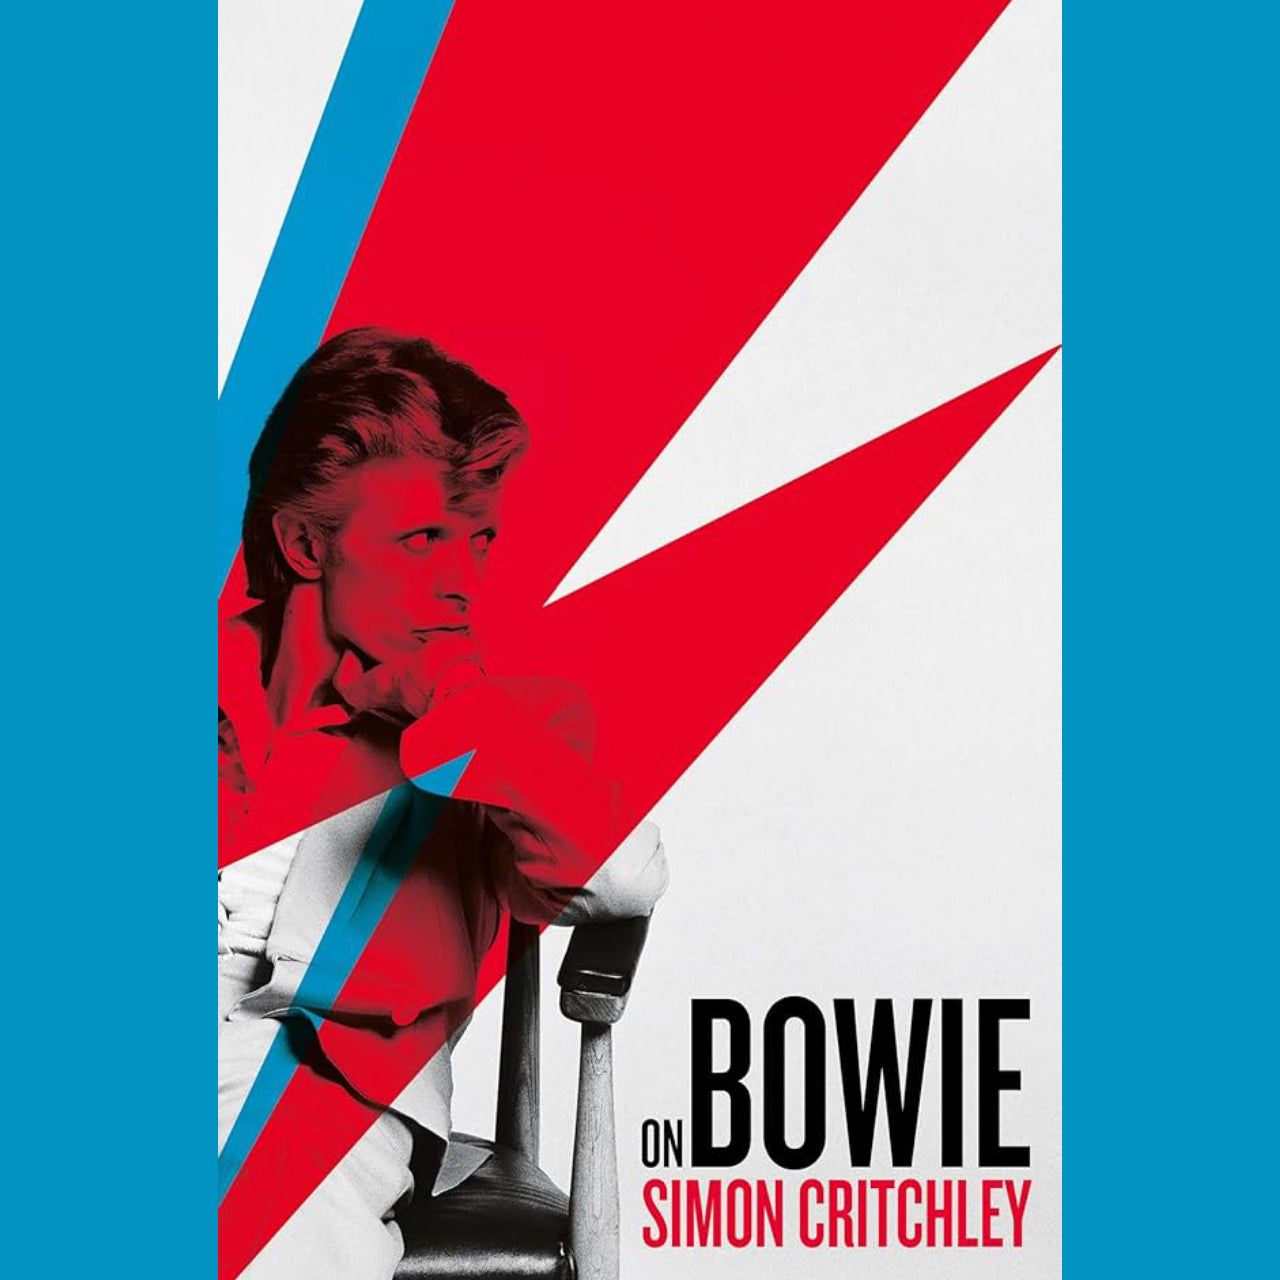  Simon Critchley - On Bowie | Buy the book from Flying Nun Records